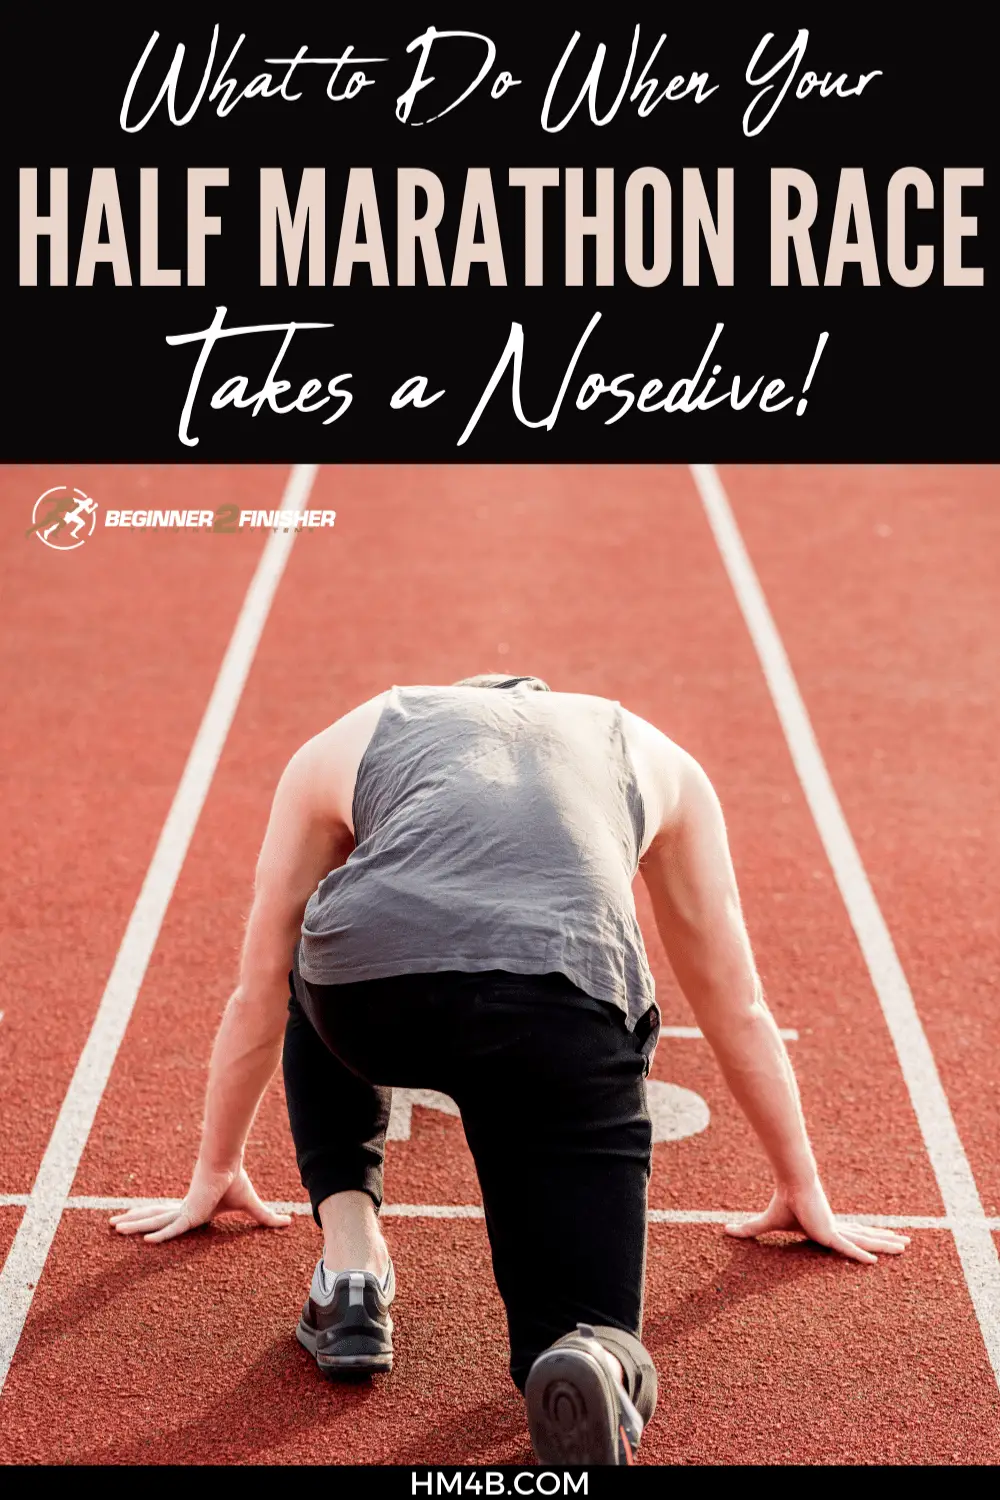 What to do when your half marathon race takes a nosedive!